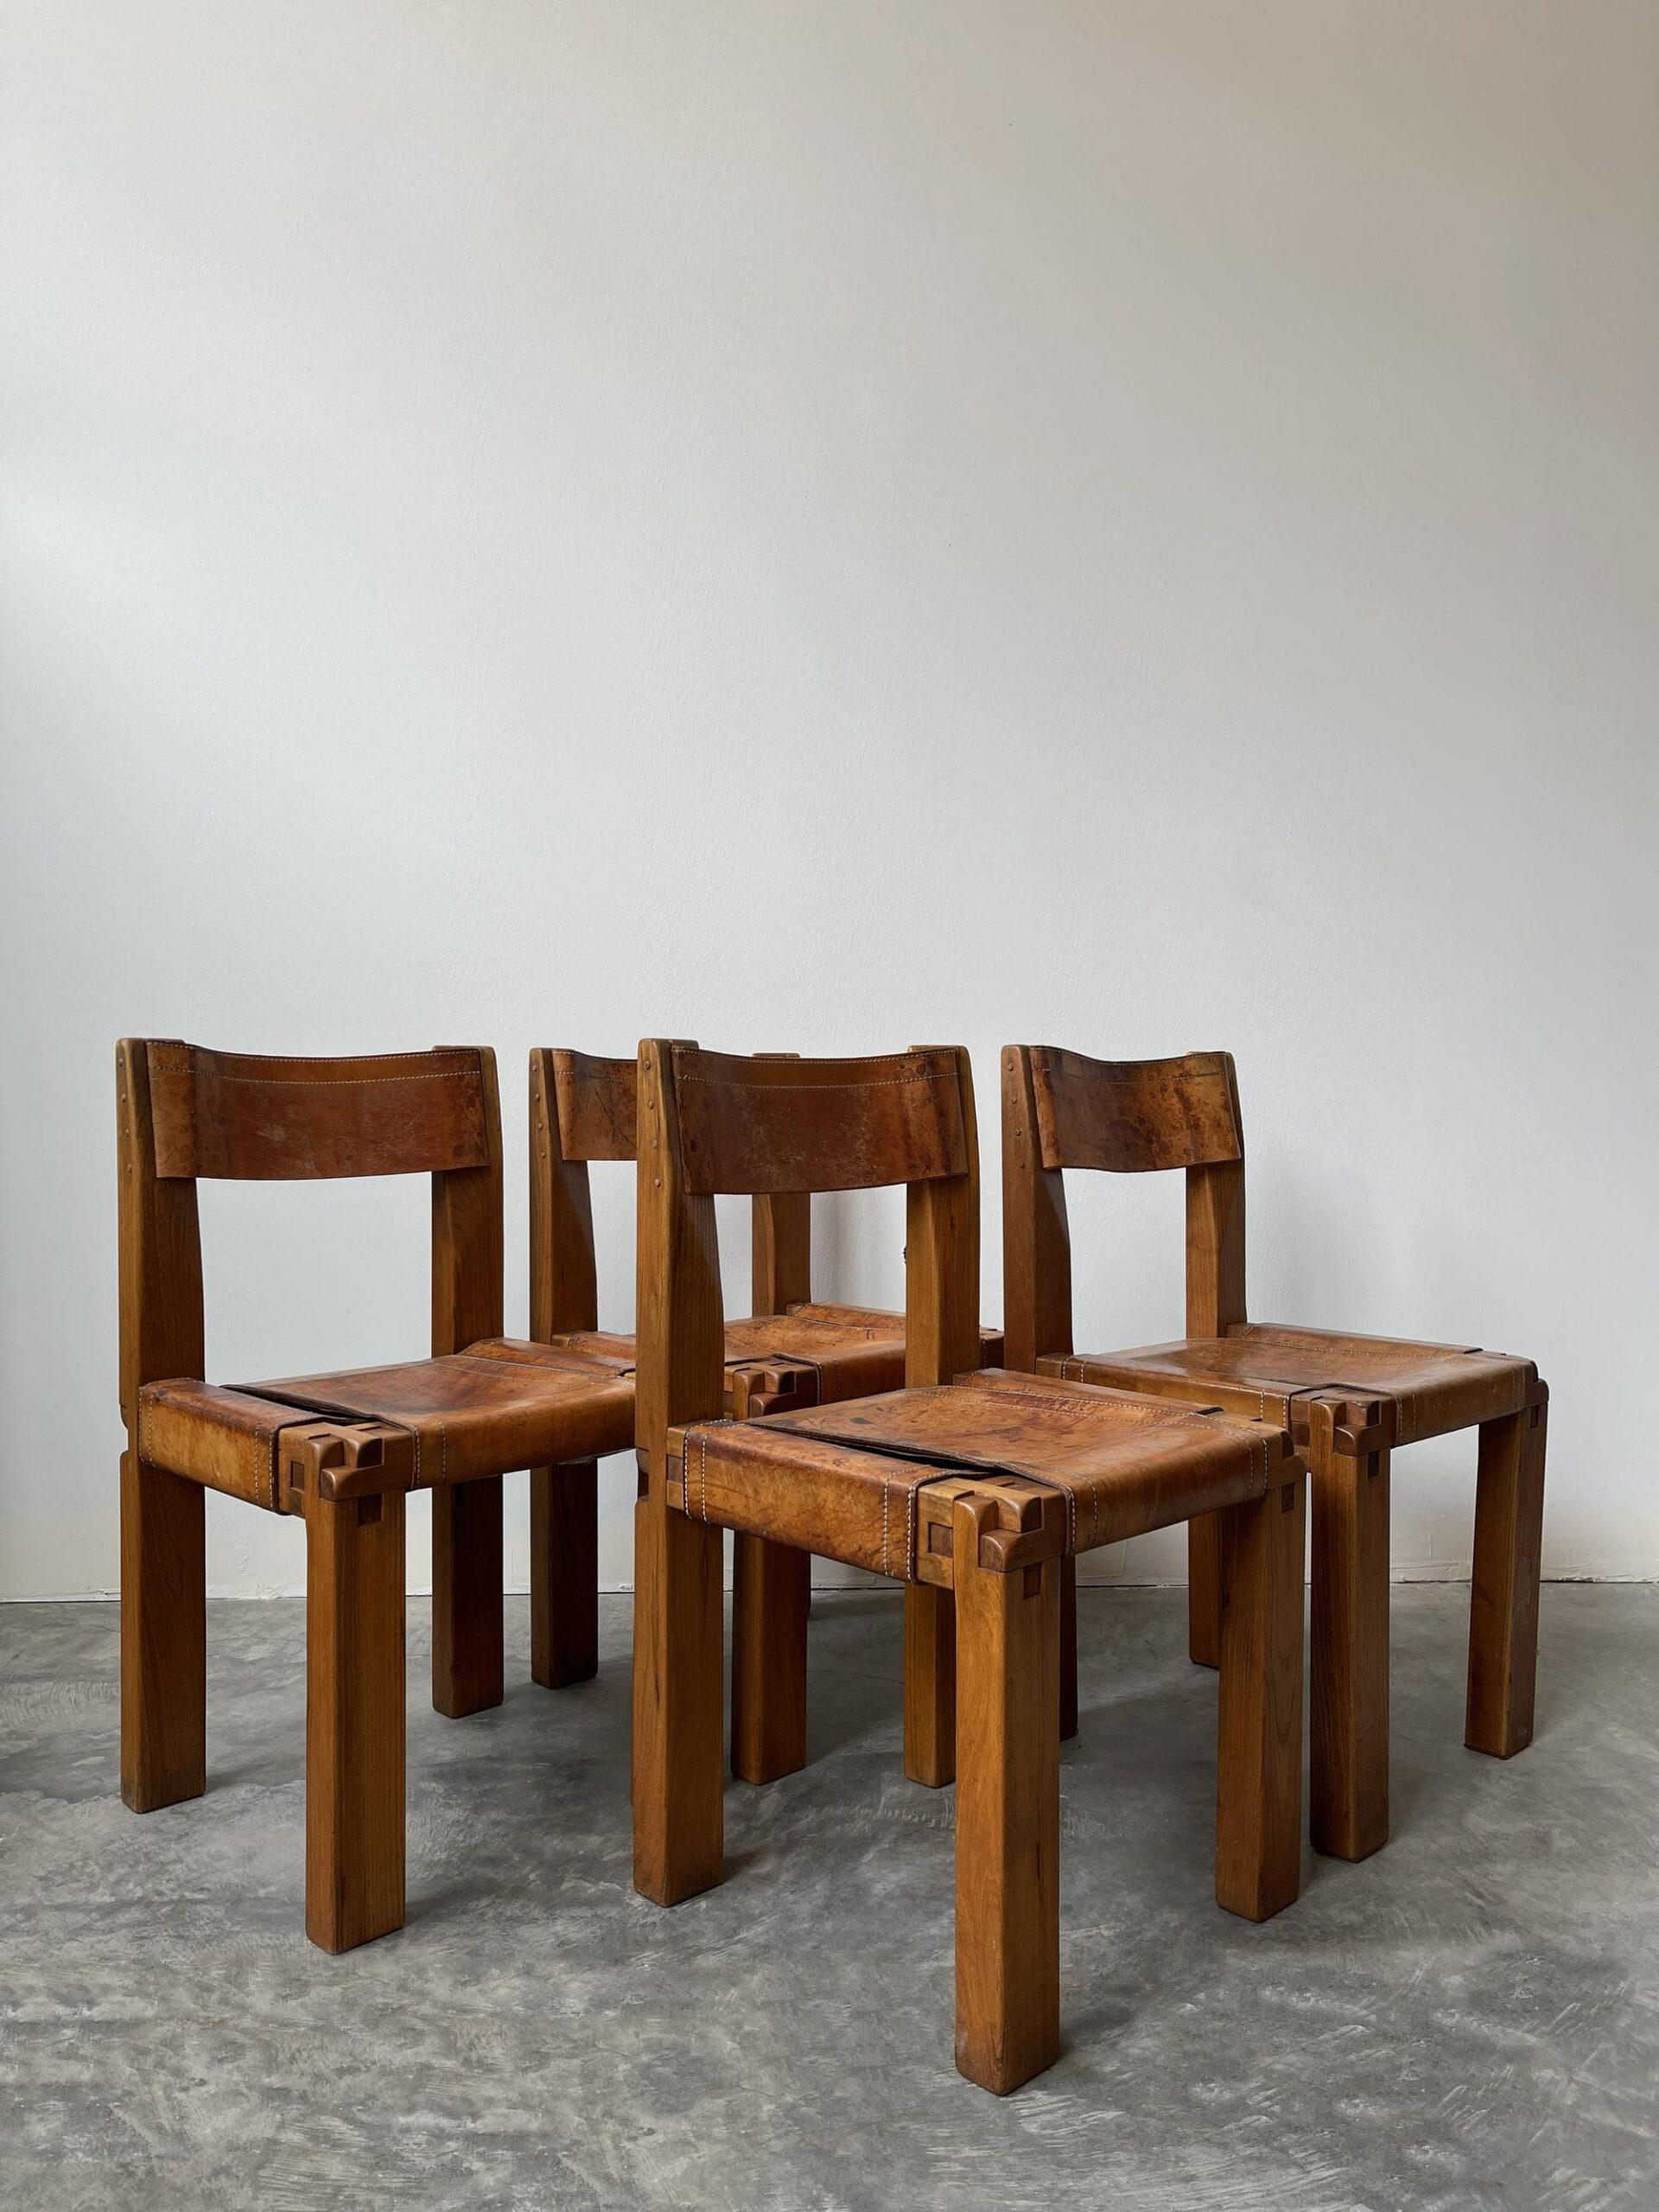 This set of 4x S11 chairs with an absolutely stunning heavy patina shows Chapo’s artisanal craftsmanship and refined sharp design details as evidenced by its wood joinery and leather stitching. A beautiful and rare set that presents a unique story